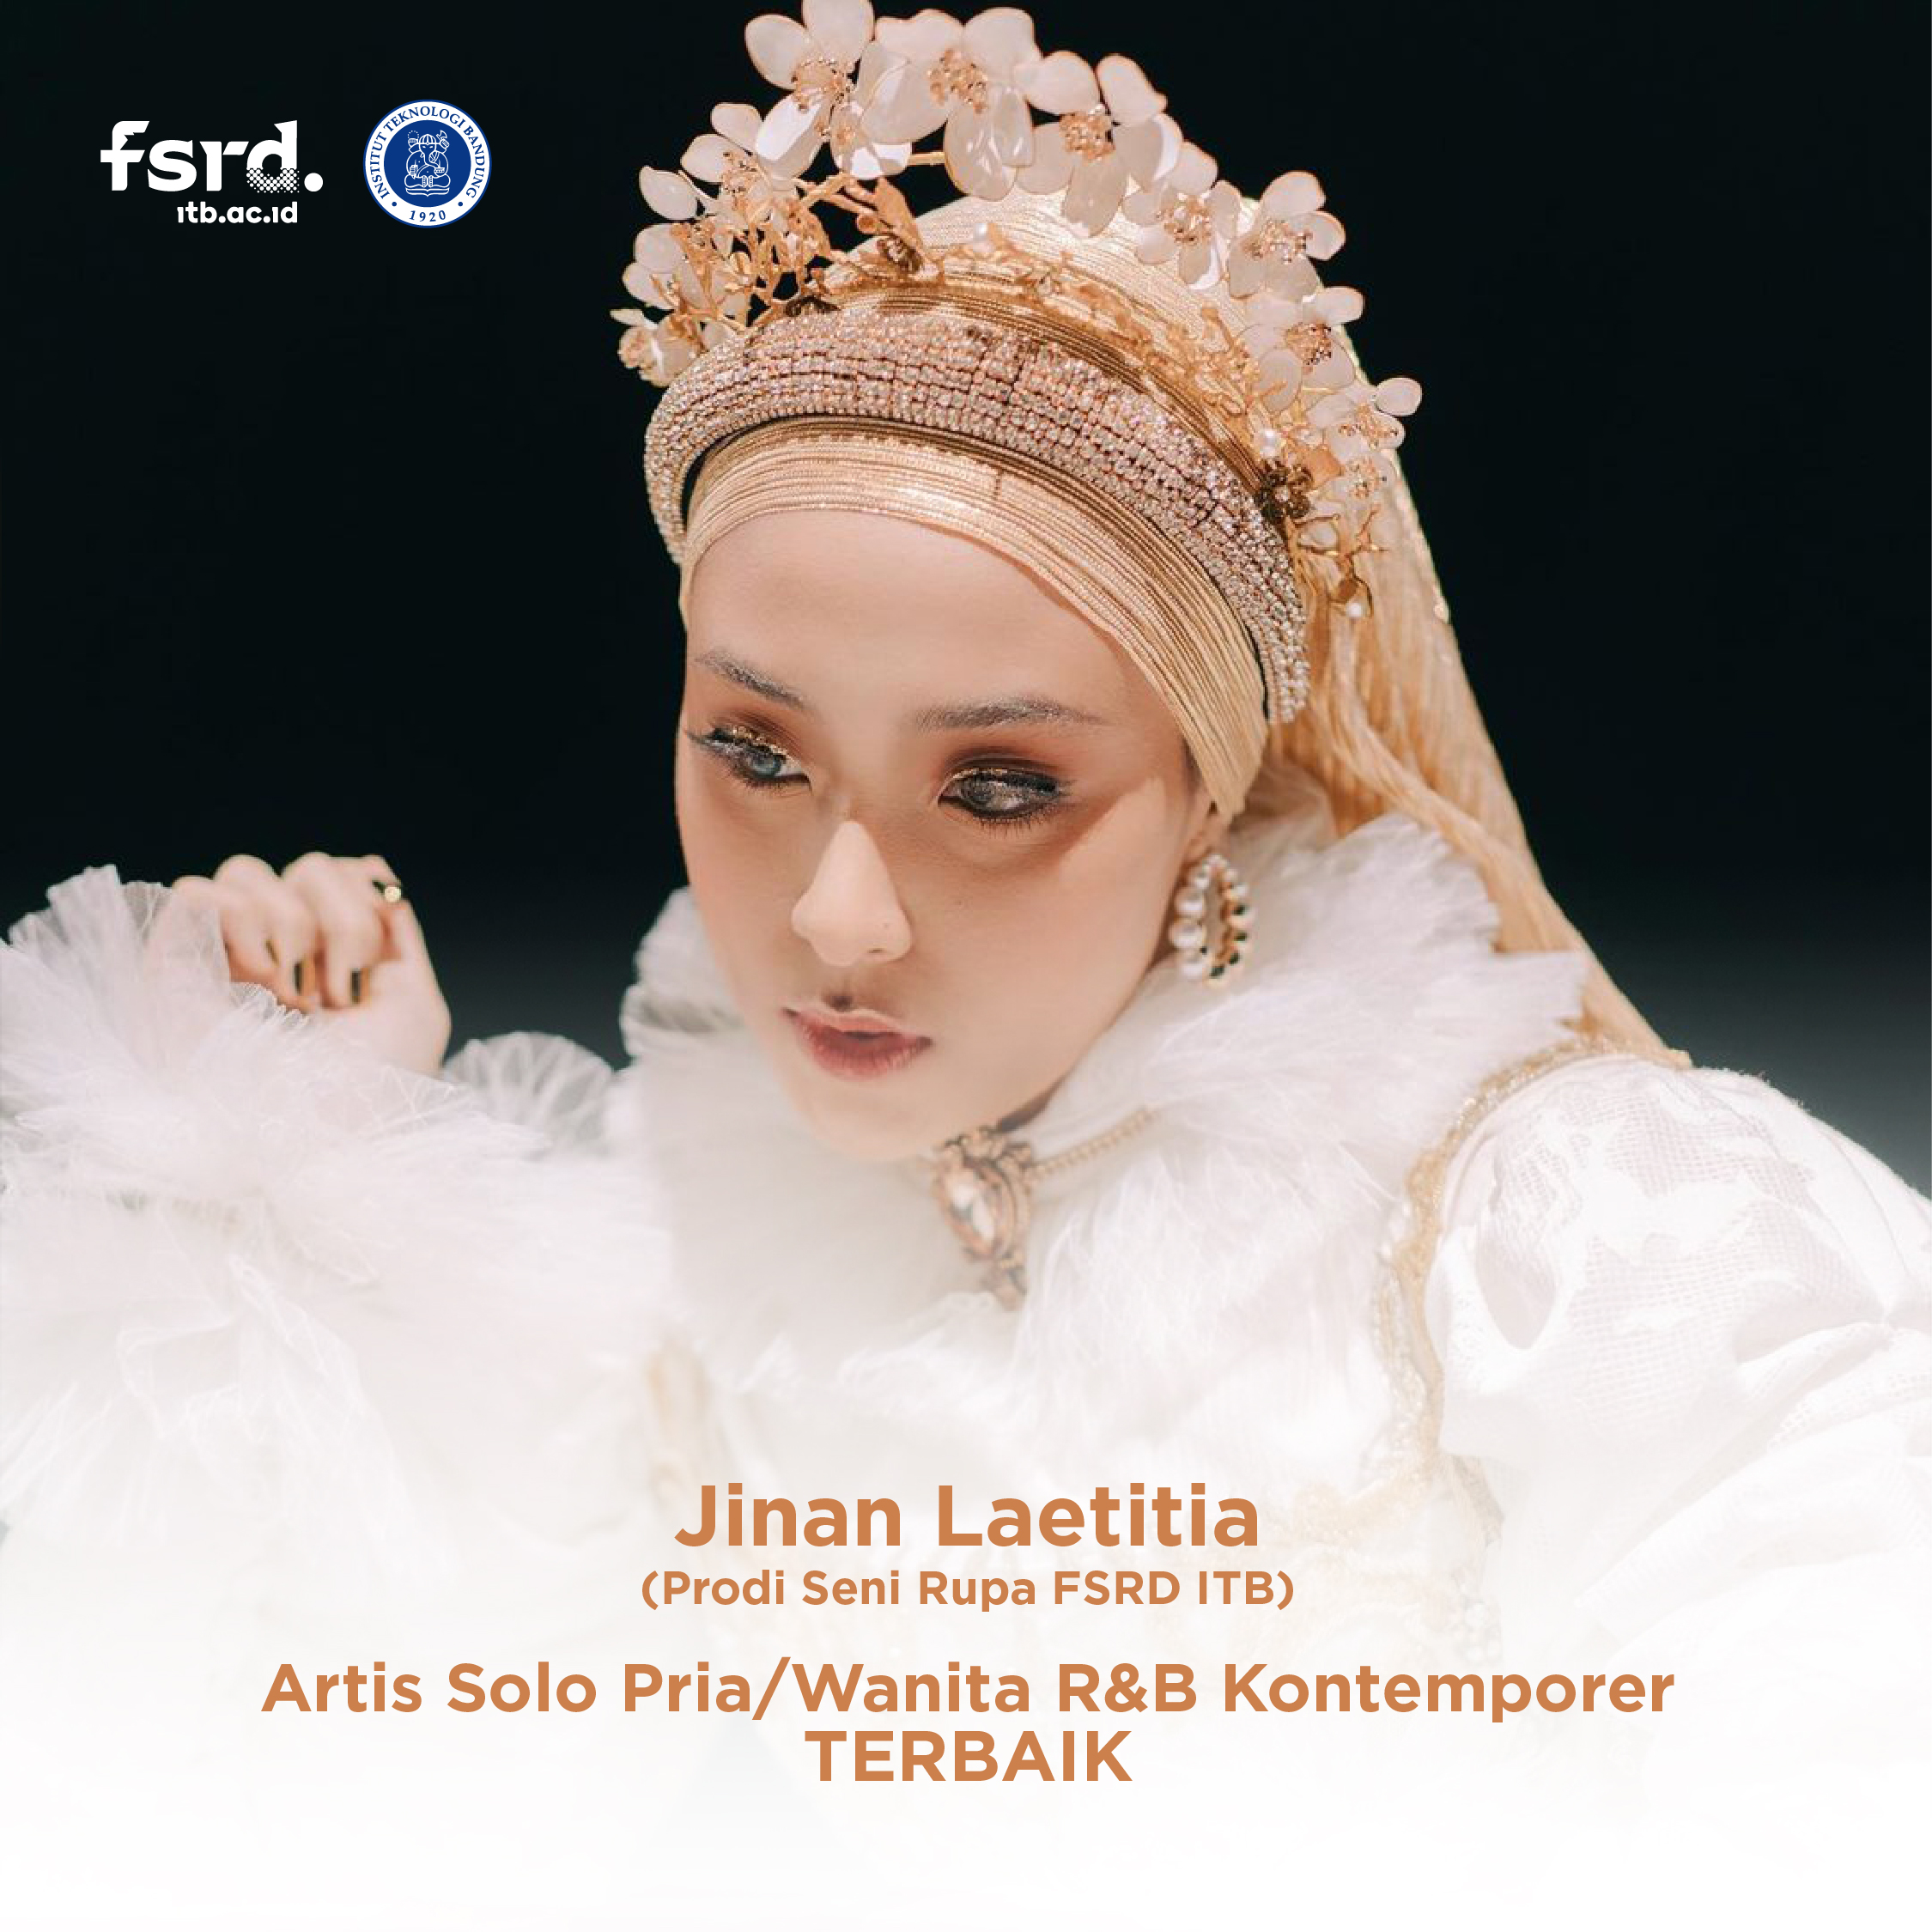 Jinan Laetitia was selected as the Best Contemporary R&B Male/Female Solo Artist at the 25th Indonesian Music Award